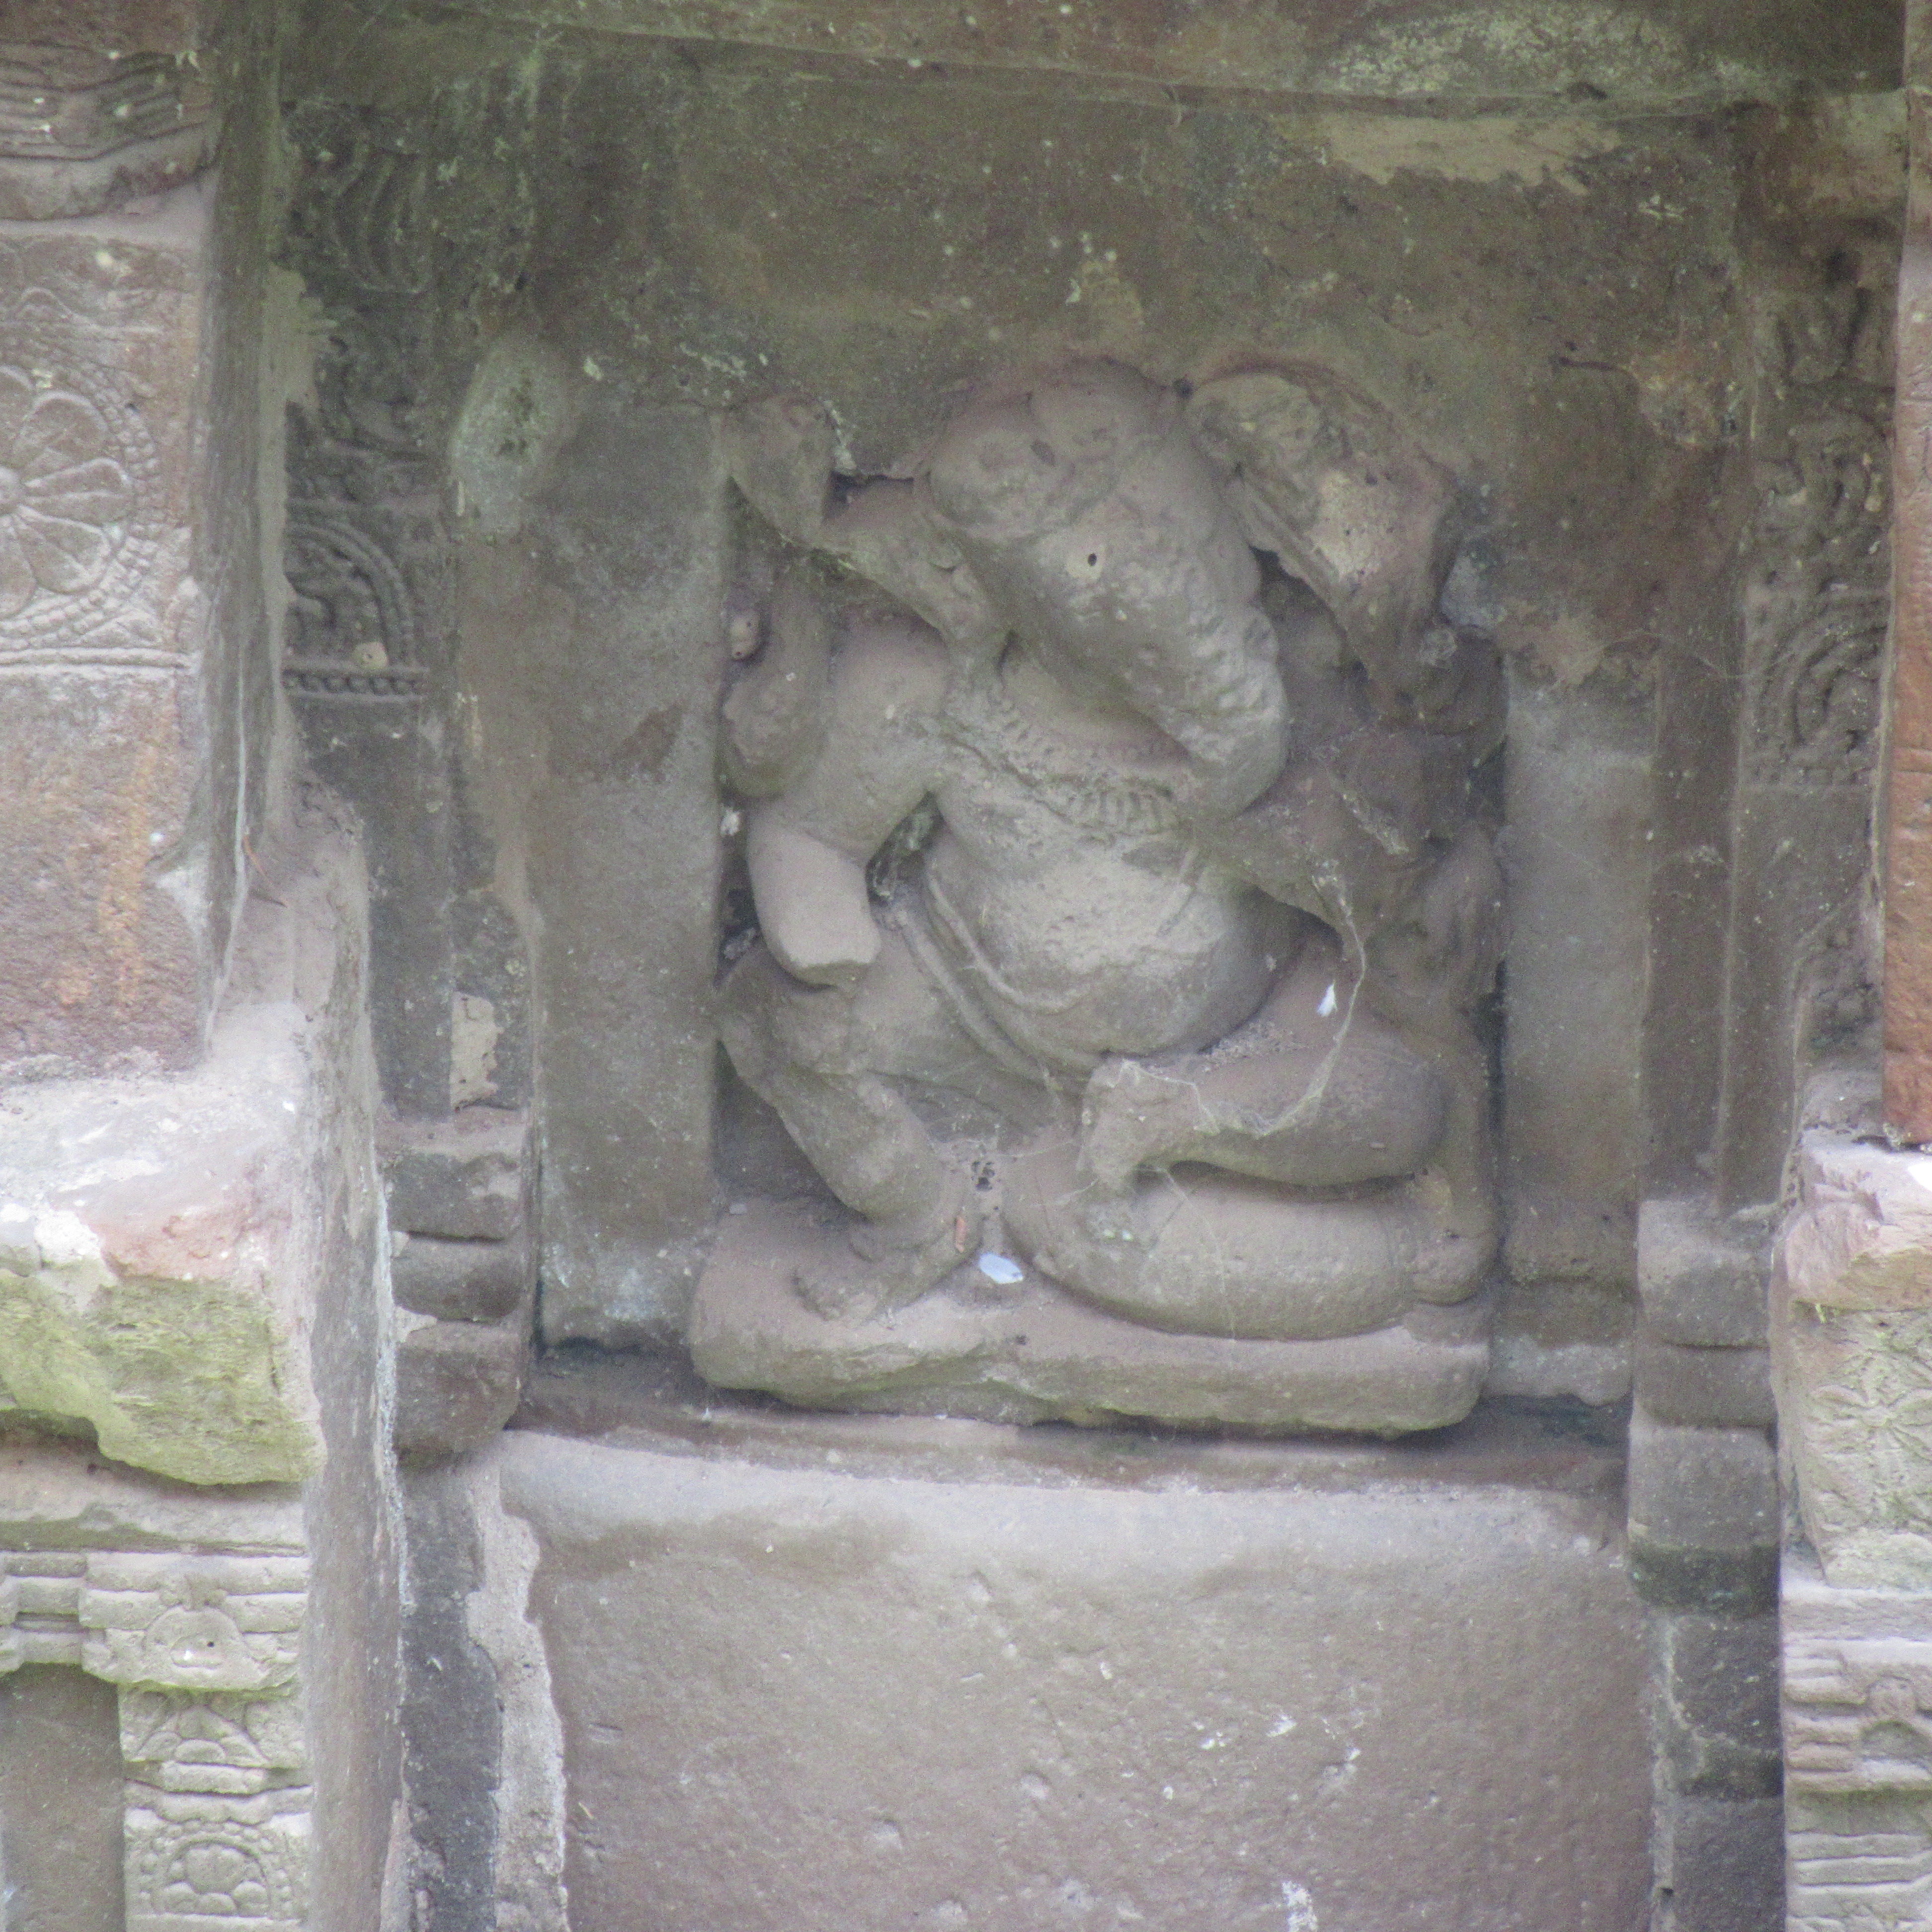 Image 3: Four-armed male deity seated in lalitasana on a cushion. It is stylistically similar to the multiple Ganesha images recovered from the Harshatmata Temple.